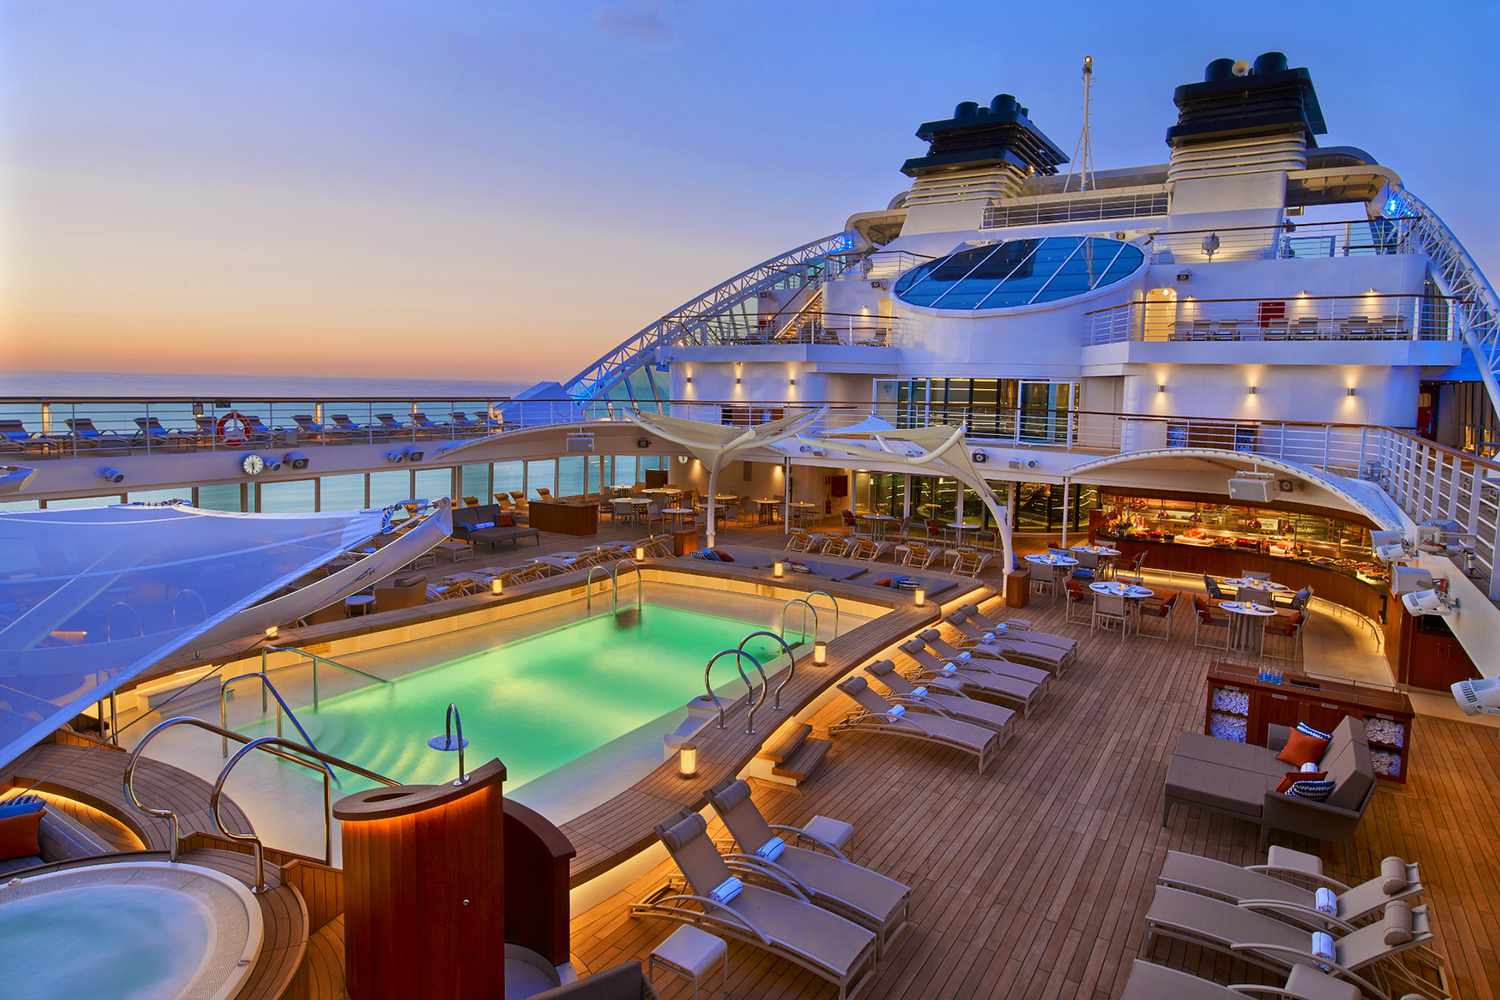 The Top 10 Large-ship Ocean Cruise Lines